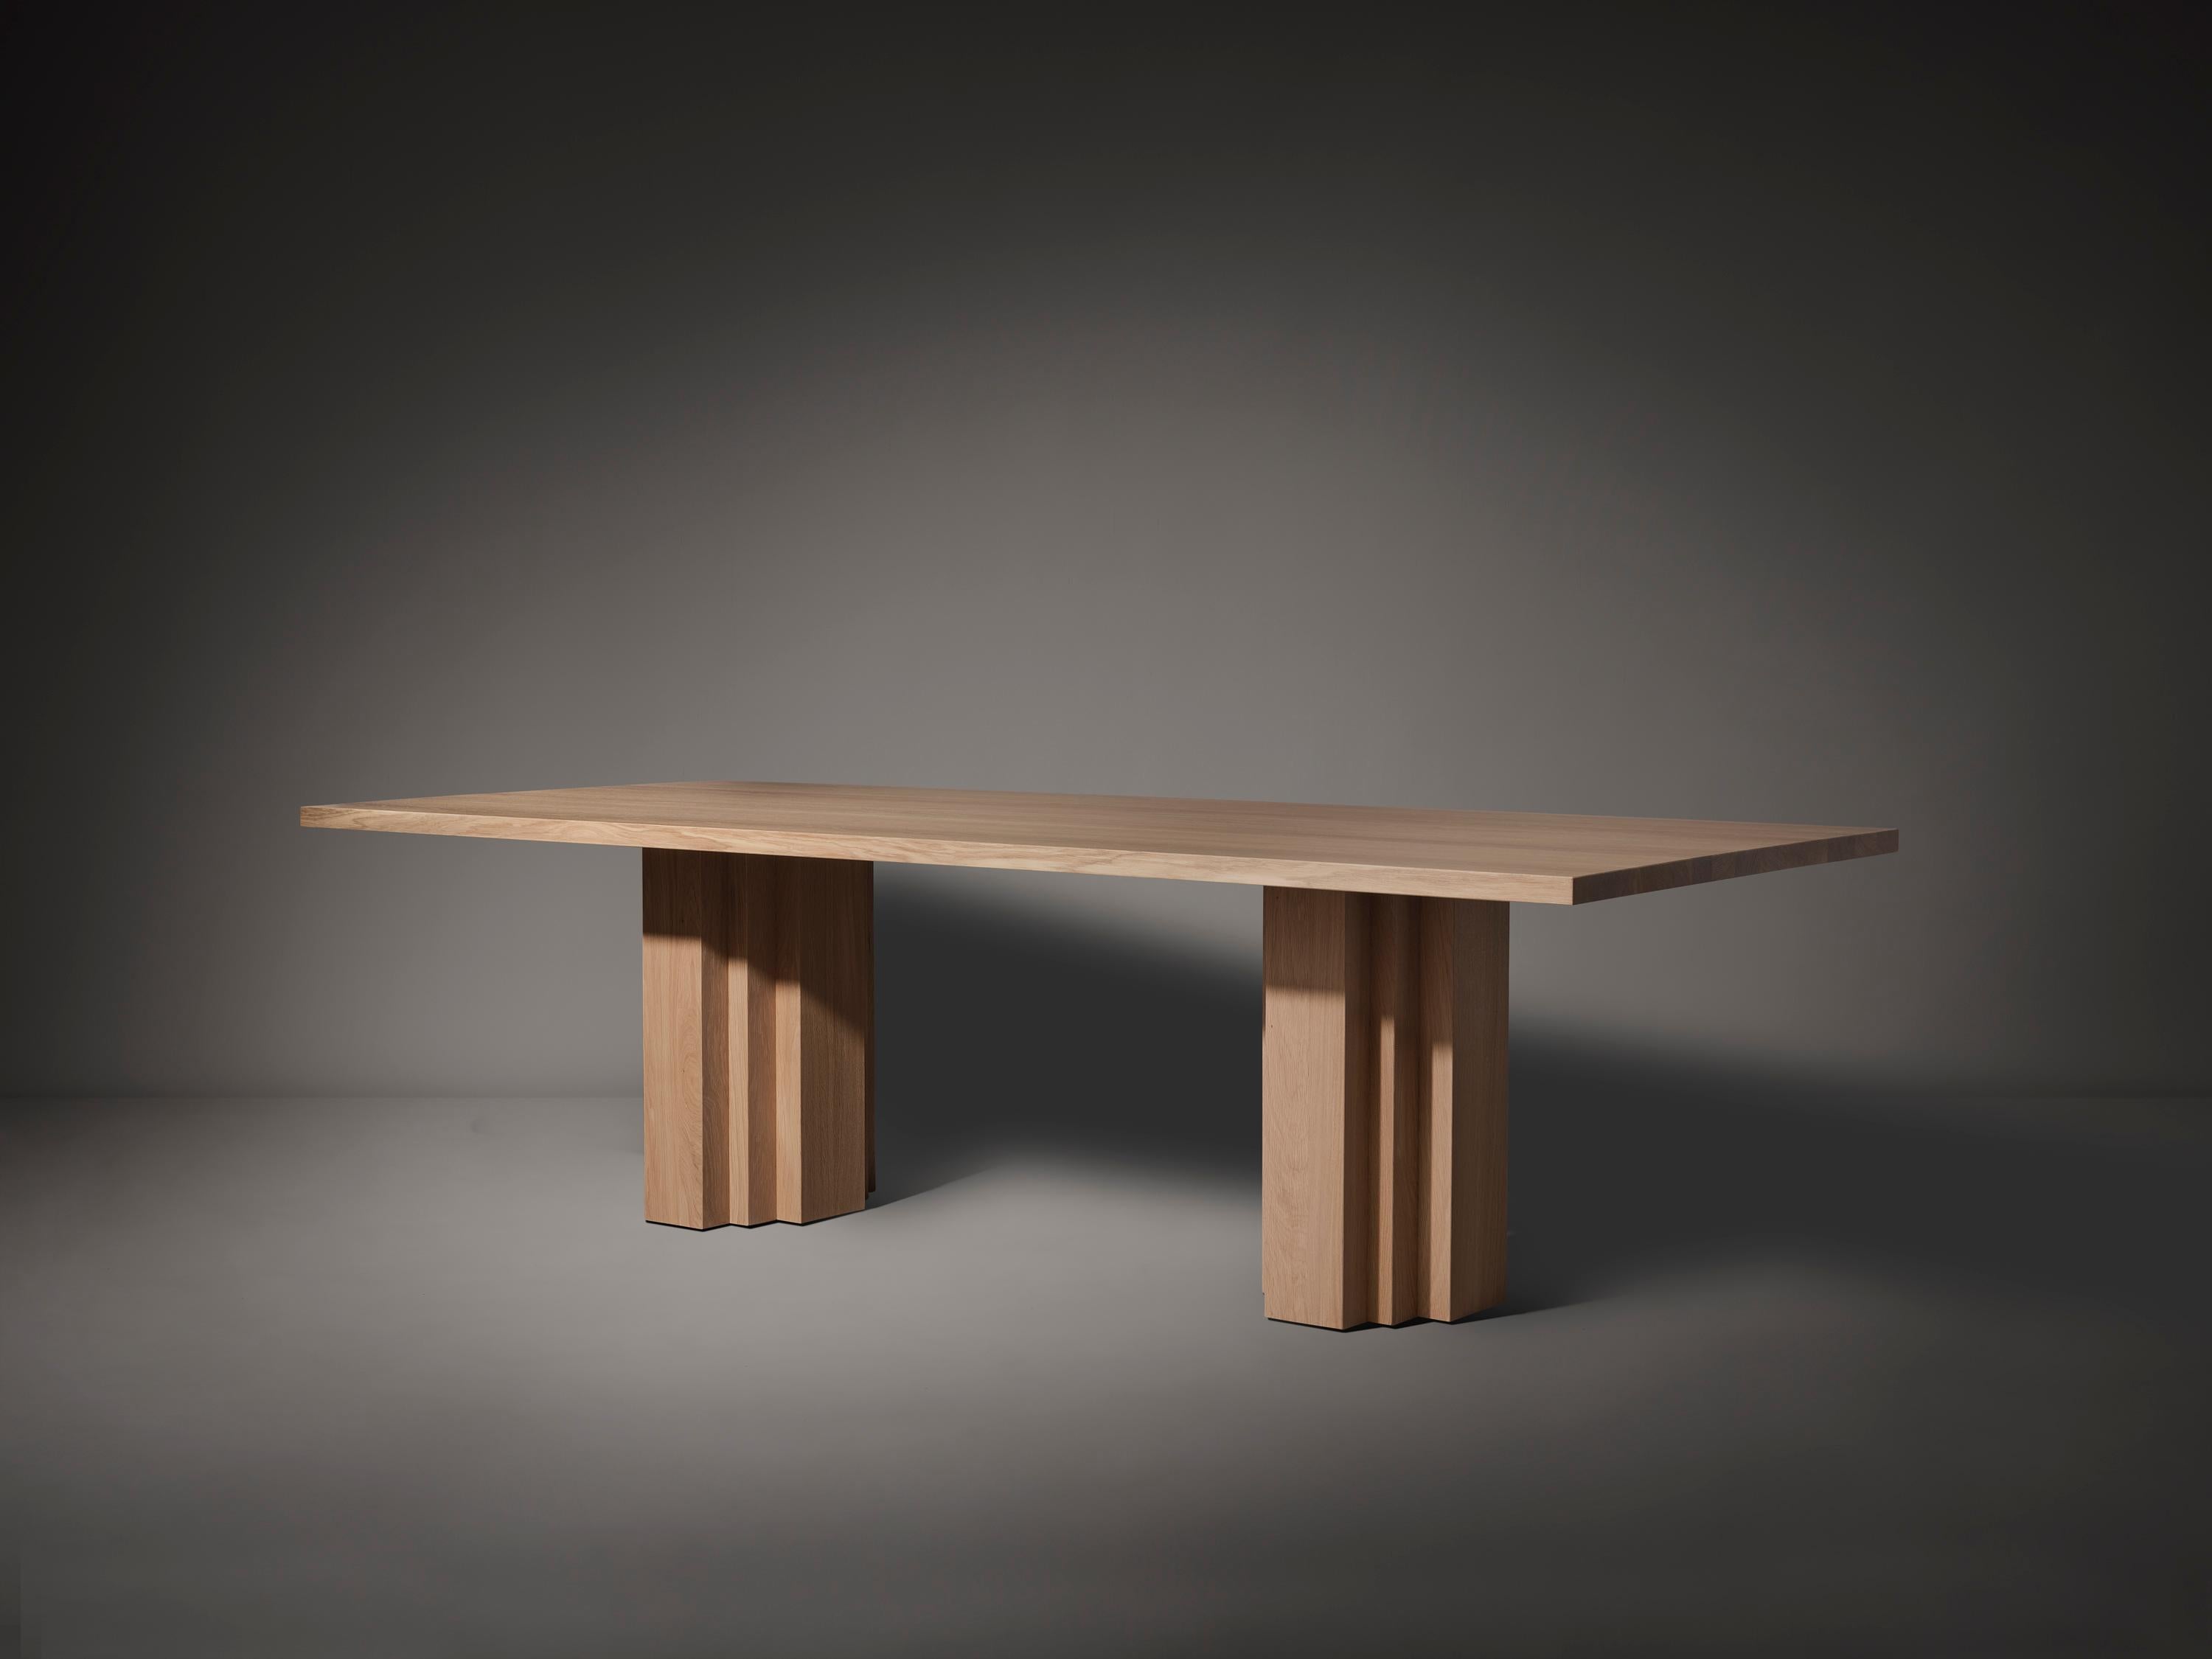 The Brut Table takes cues from Brutalism and Amsterdam School architecture. Voluminous columns with a monumental aesthetic support the heavy table top. The table is designed by Aad Bos and crafted in the Netherlands.

Mokko is an Amsterdam based